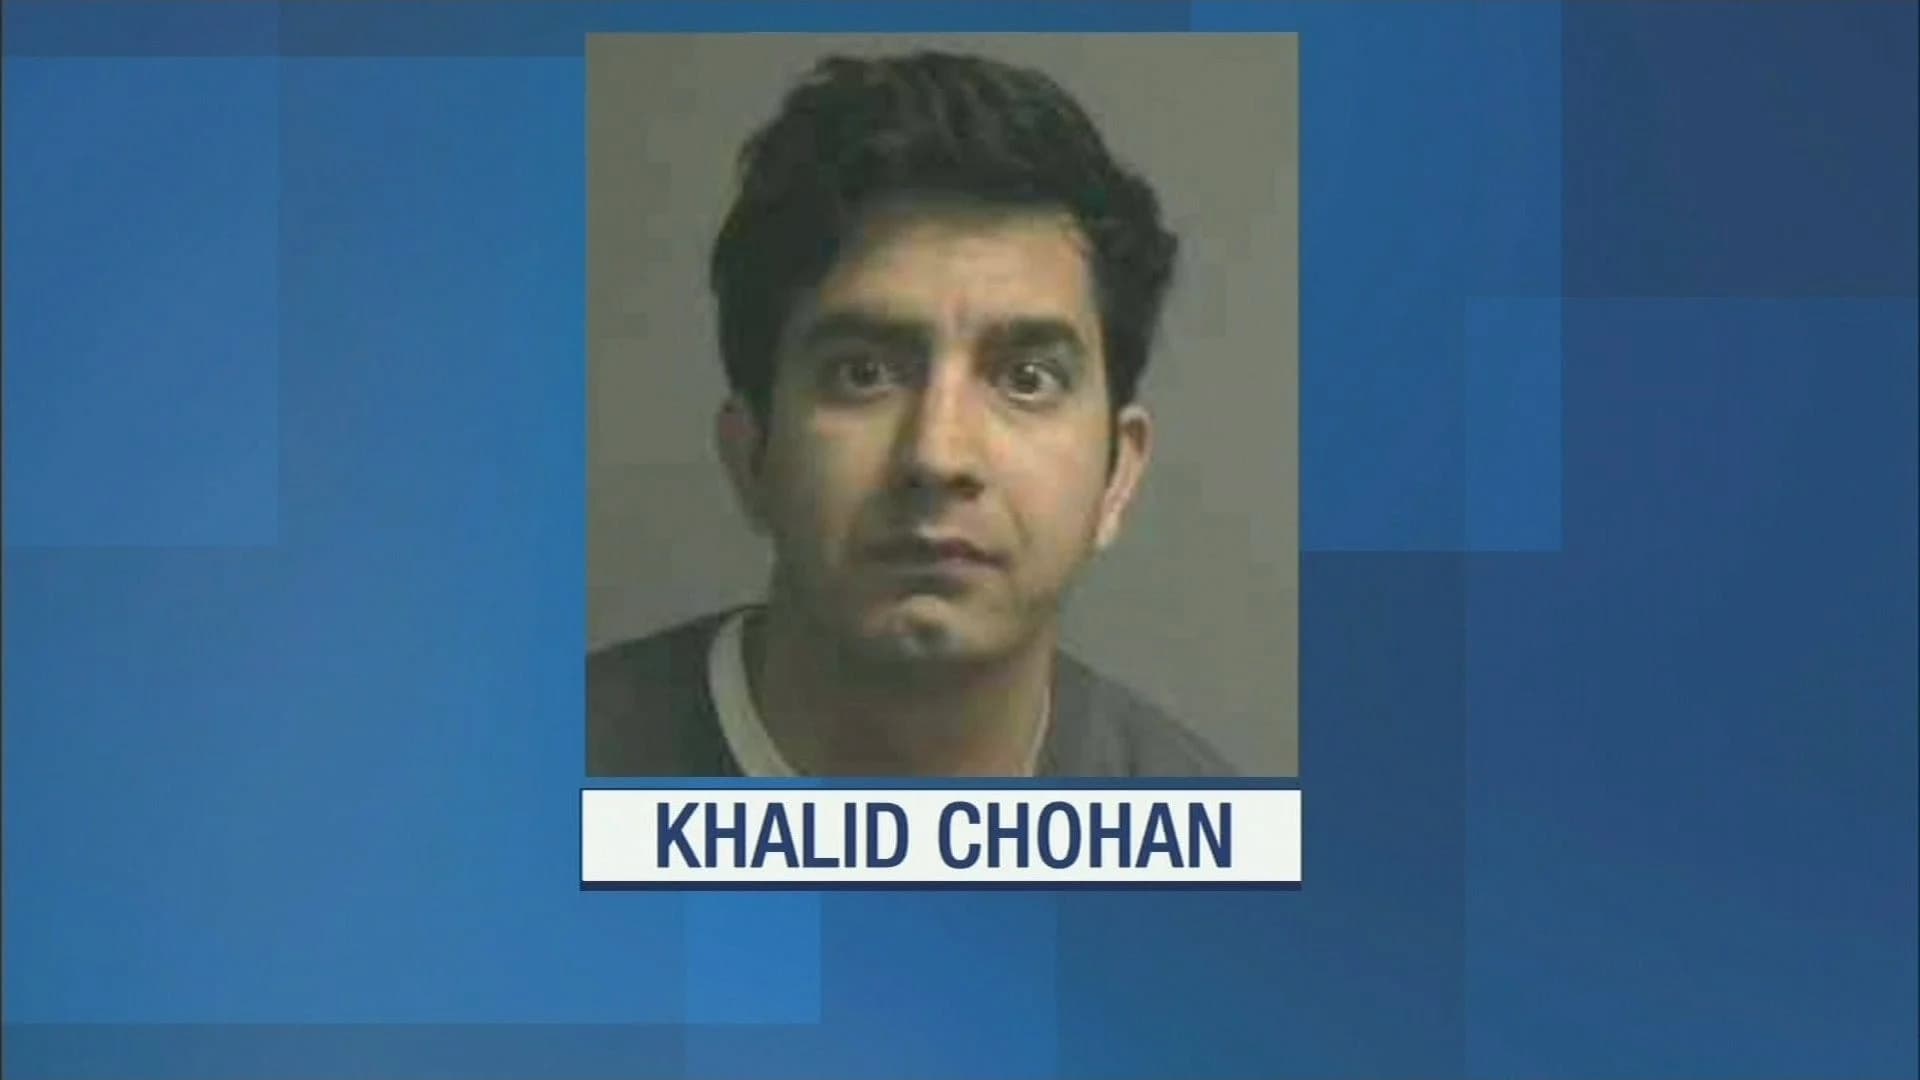 Man who touched underage co-workers gets probation